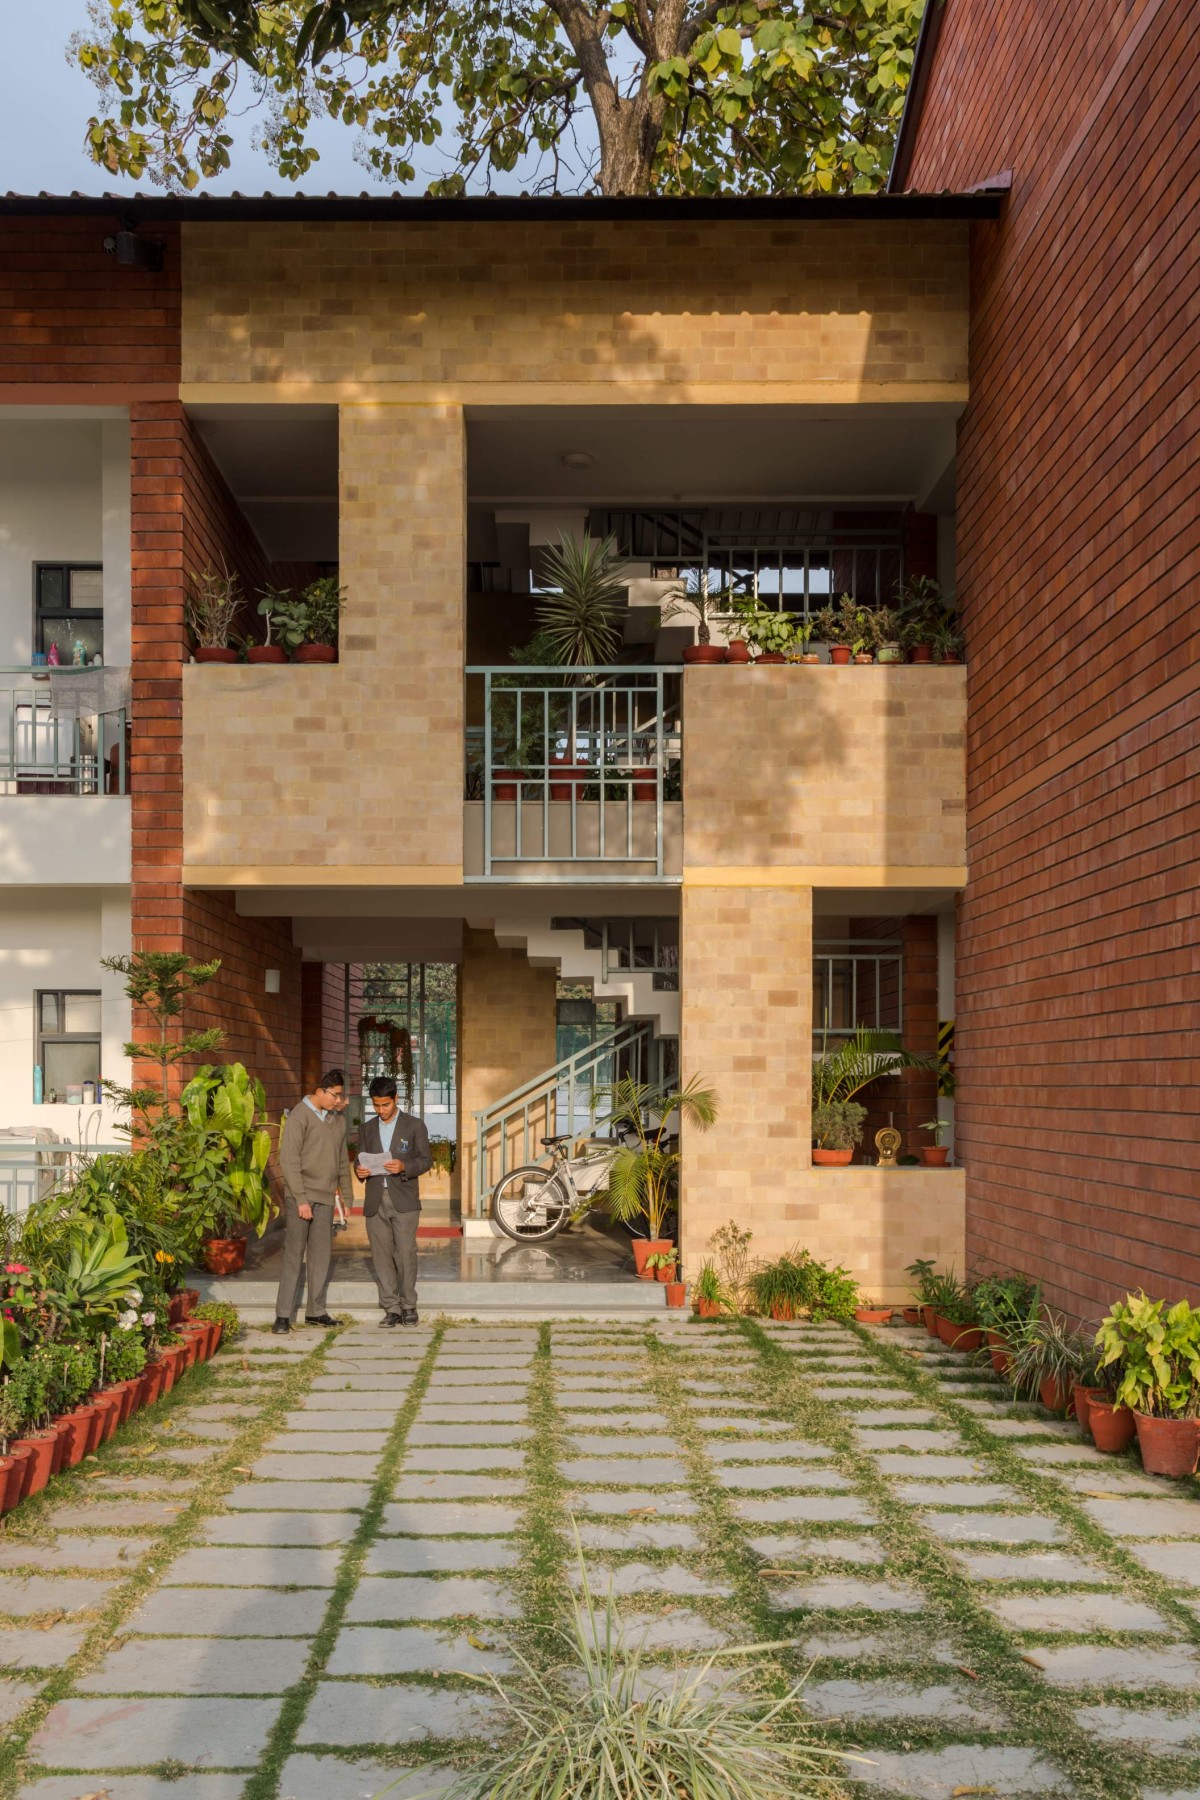 Porch of Teacher's Residences at The Doon School by Anagram Architects